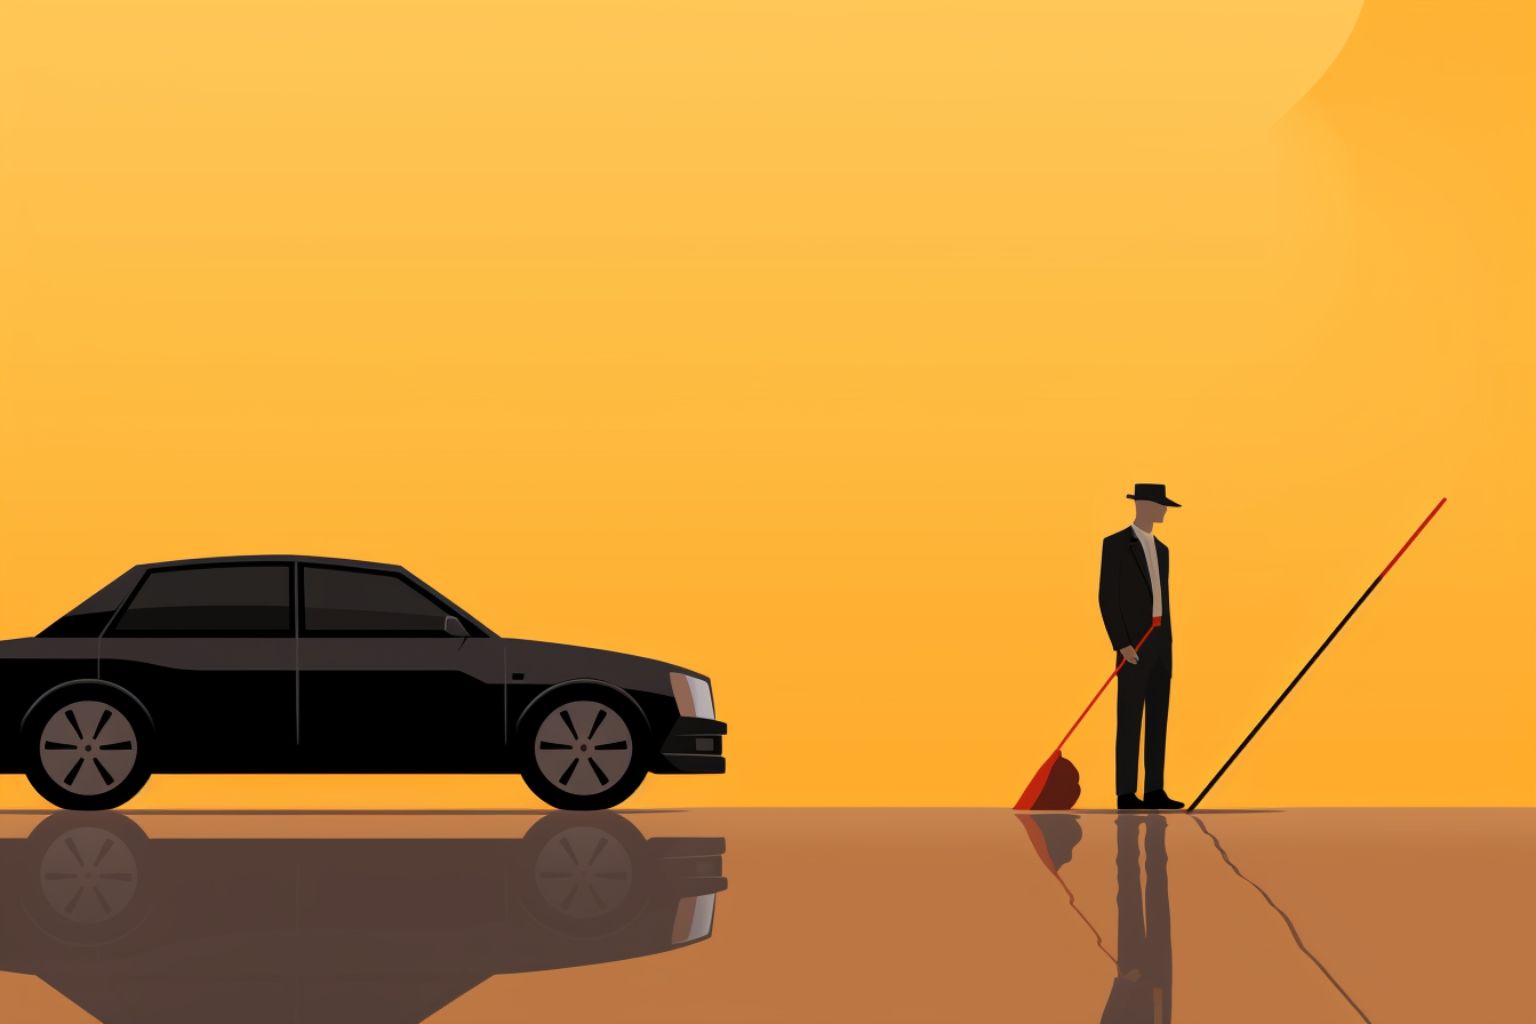 When William Houck returns his rental car to LAX, Budget tries to charge him a fee for refueling and cleaning. But he brought the car back with a full gas tank, and it was clean. How can he fight these charges?